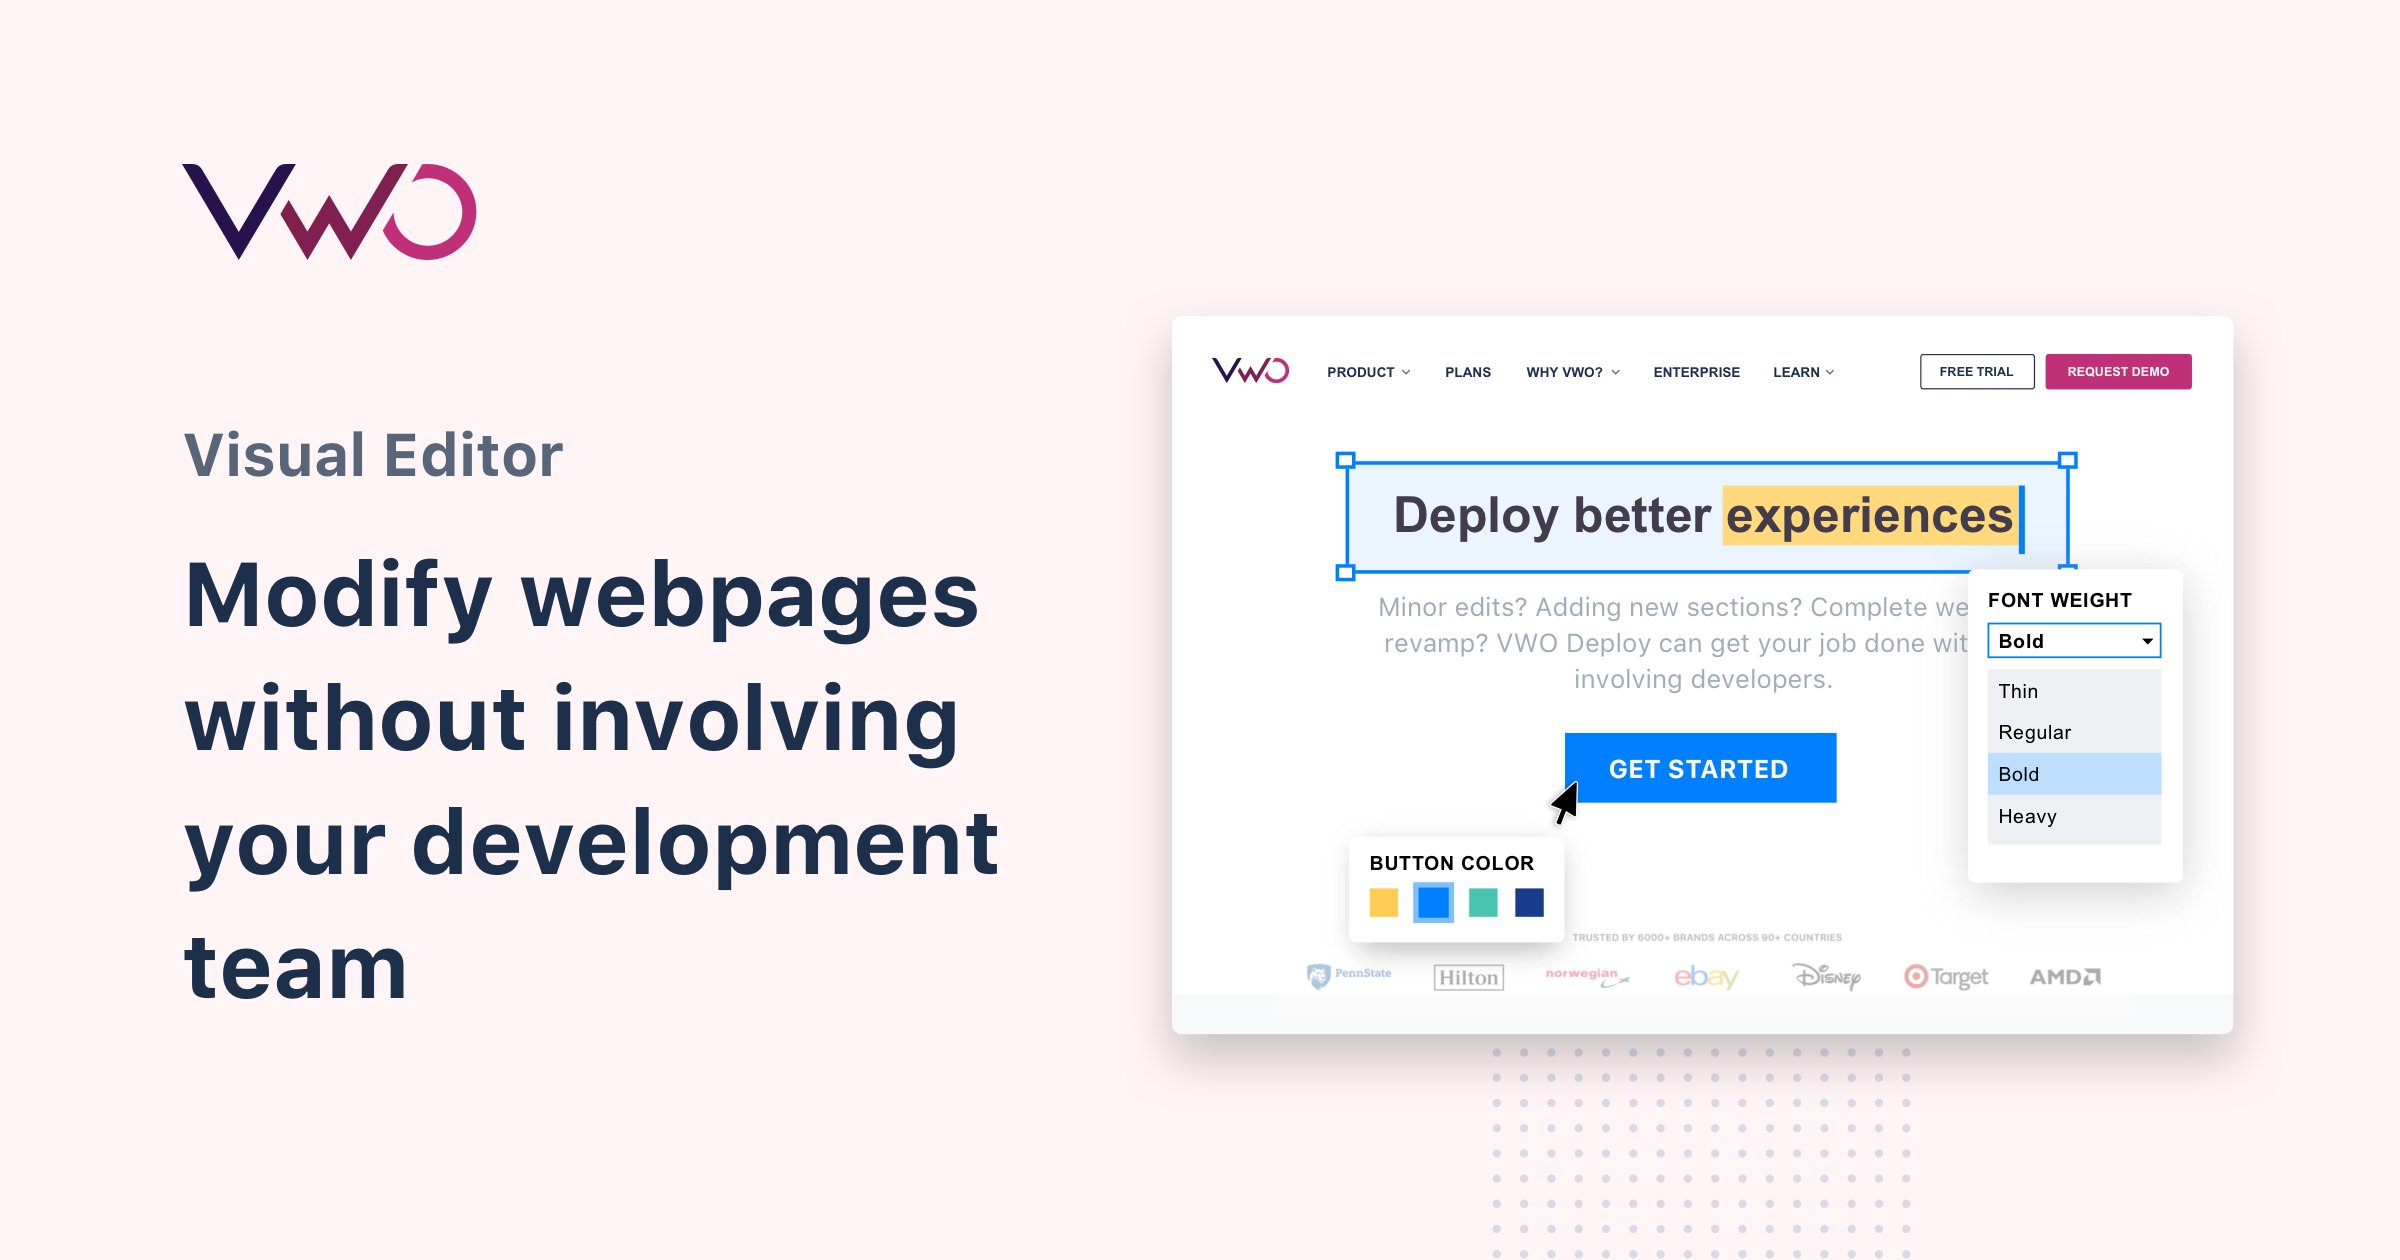 Modify webpages without involving your development team